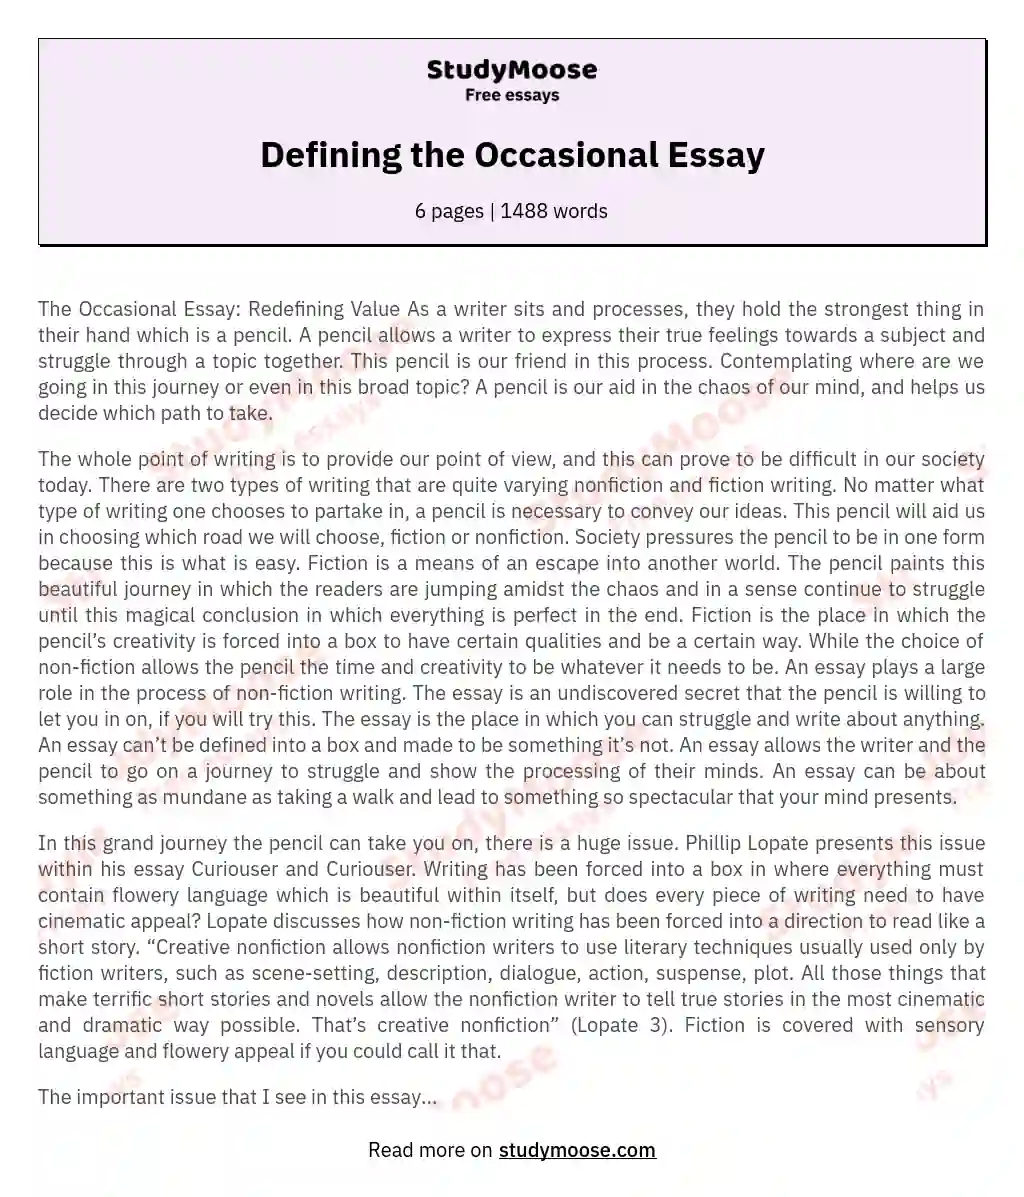 Defining the Occasional Essay